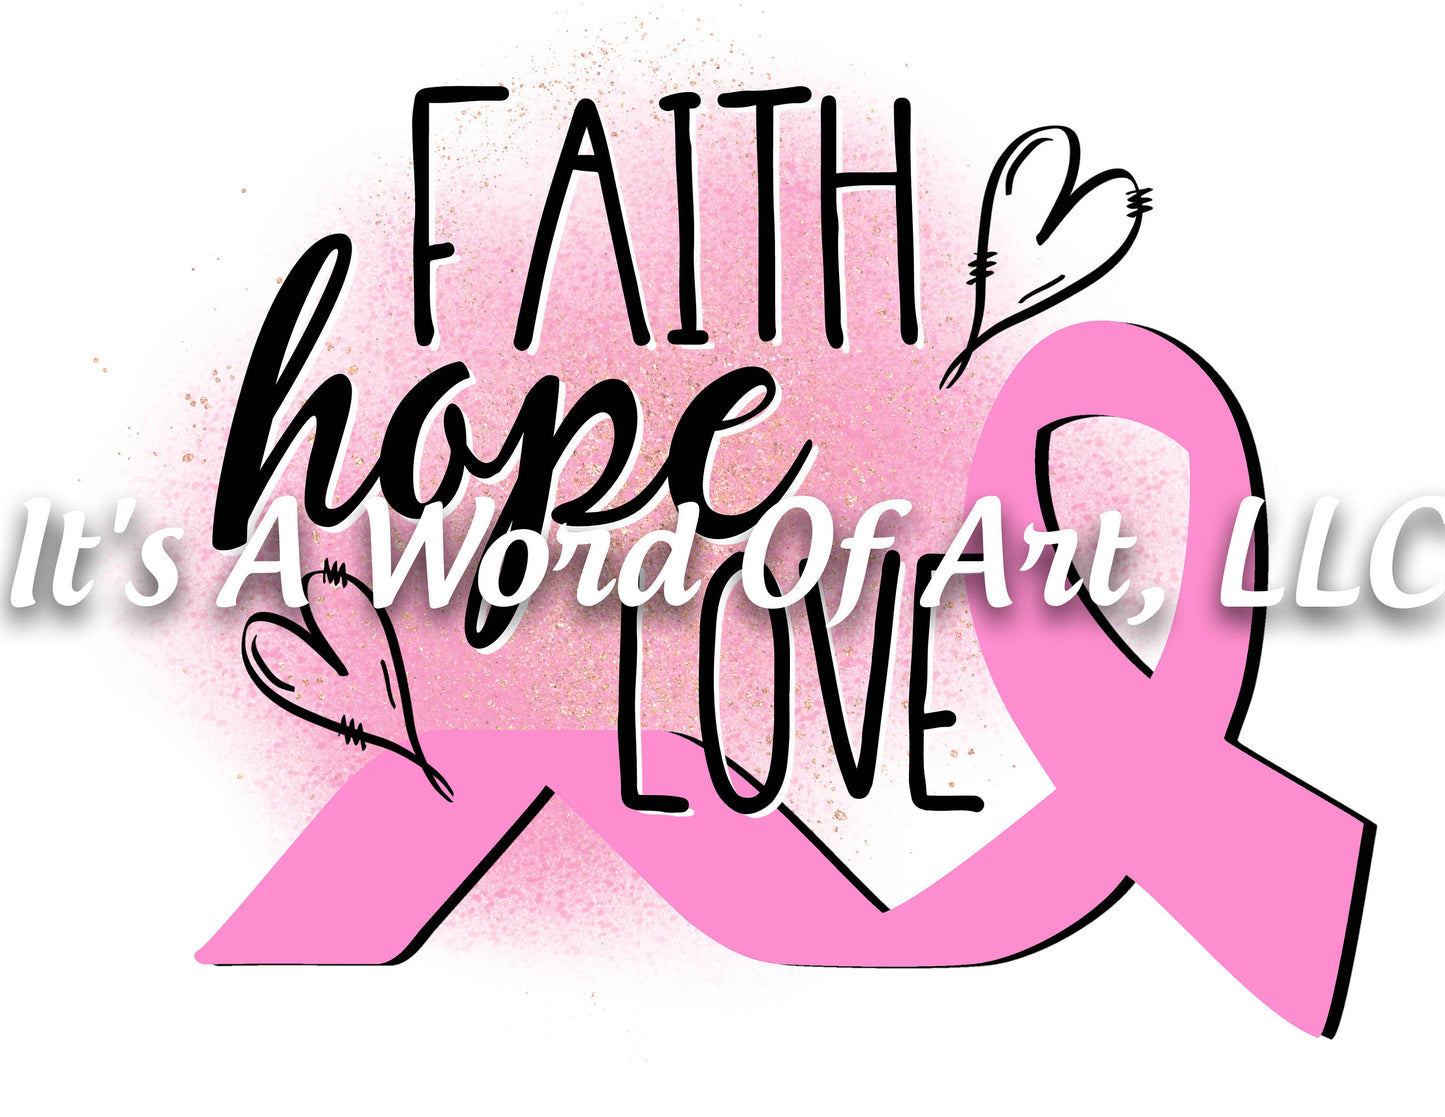 Breast Cancer Awareness 01 - Faith Hope Love Breast Cancer Awareness Ribbon - Sublimation Transfer Set/Ready To Press Sublimation Transfer